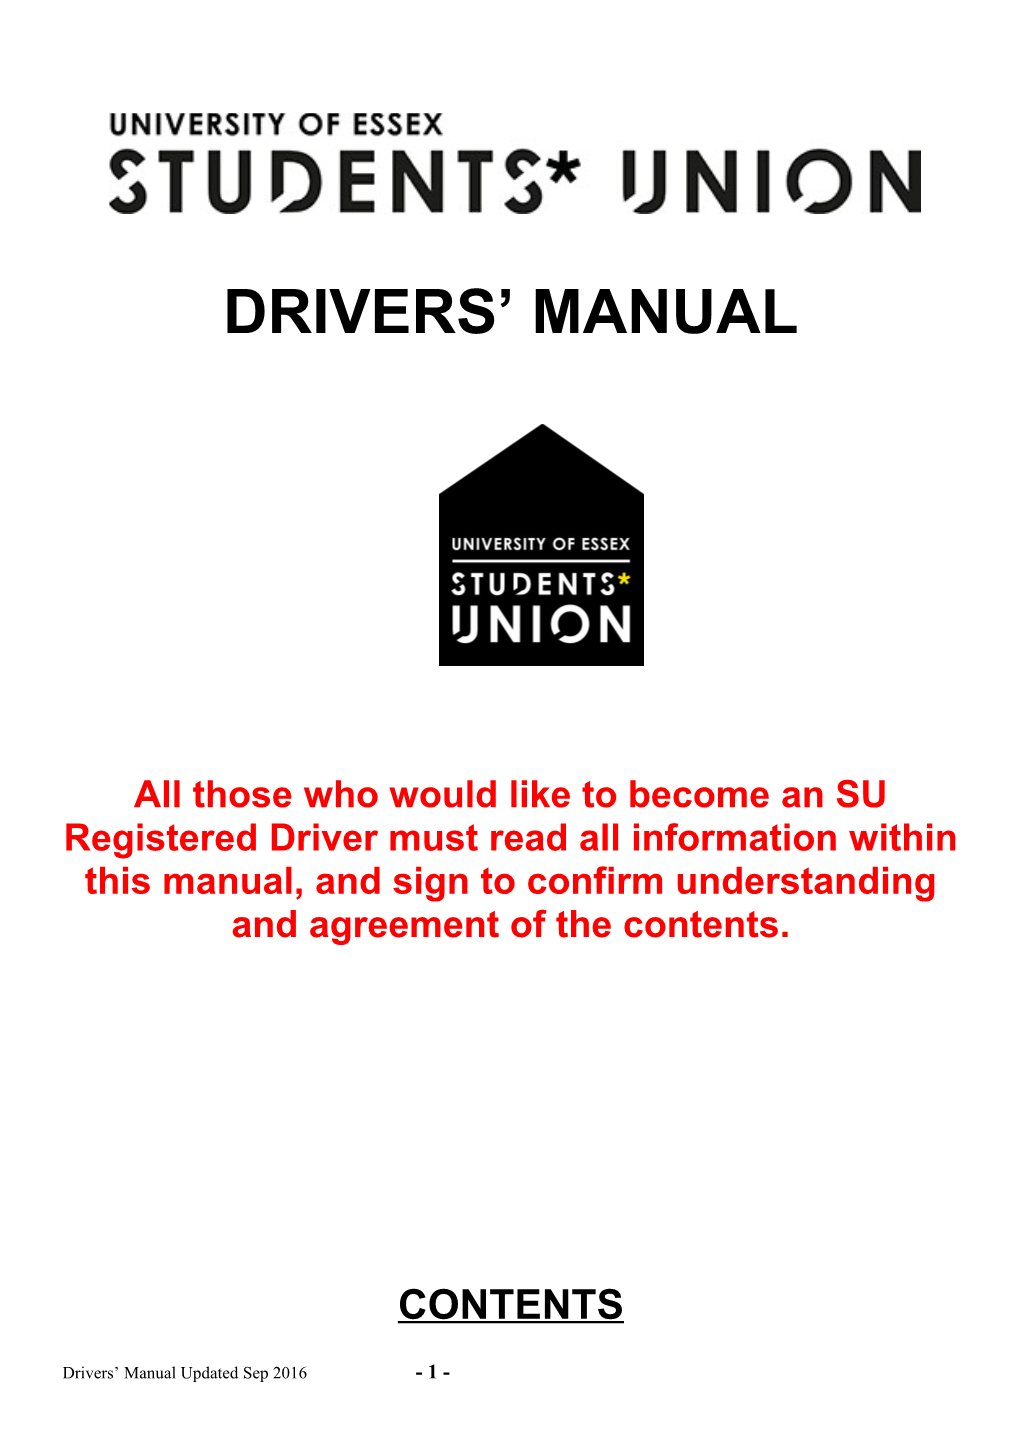 All Those Who Would Like to Become an SU Registered Driver Must Read All Information Within